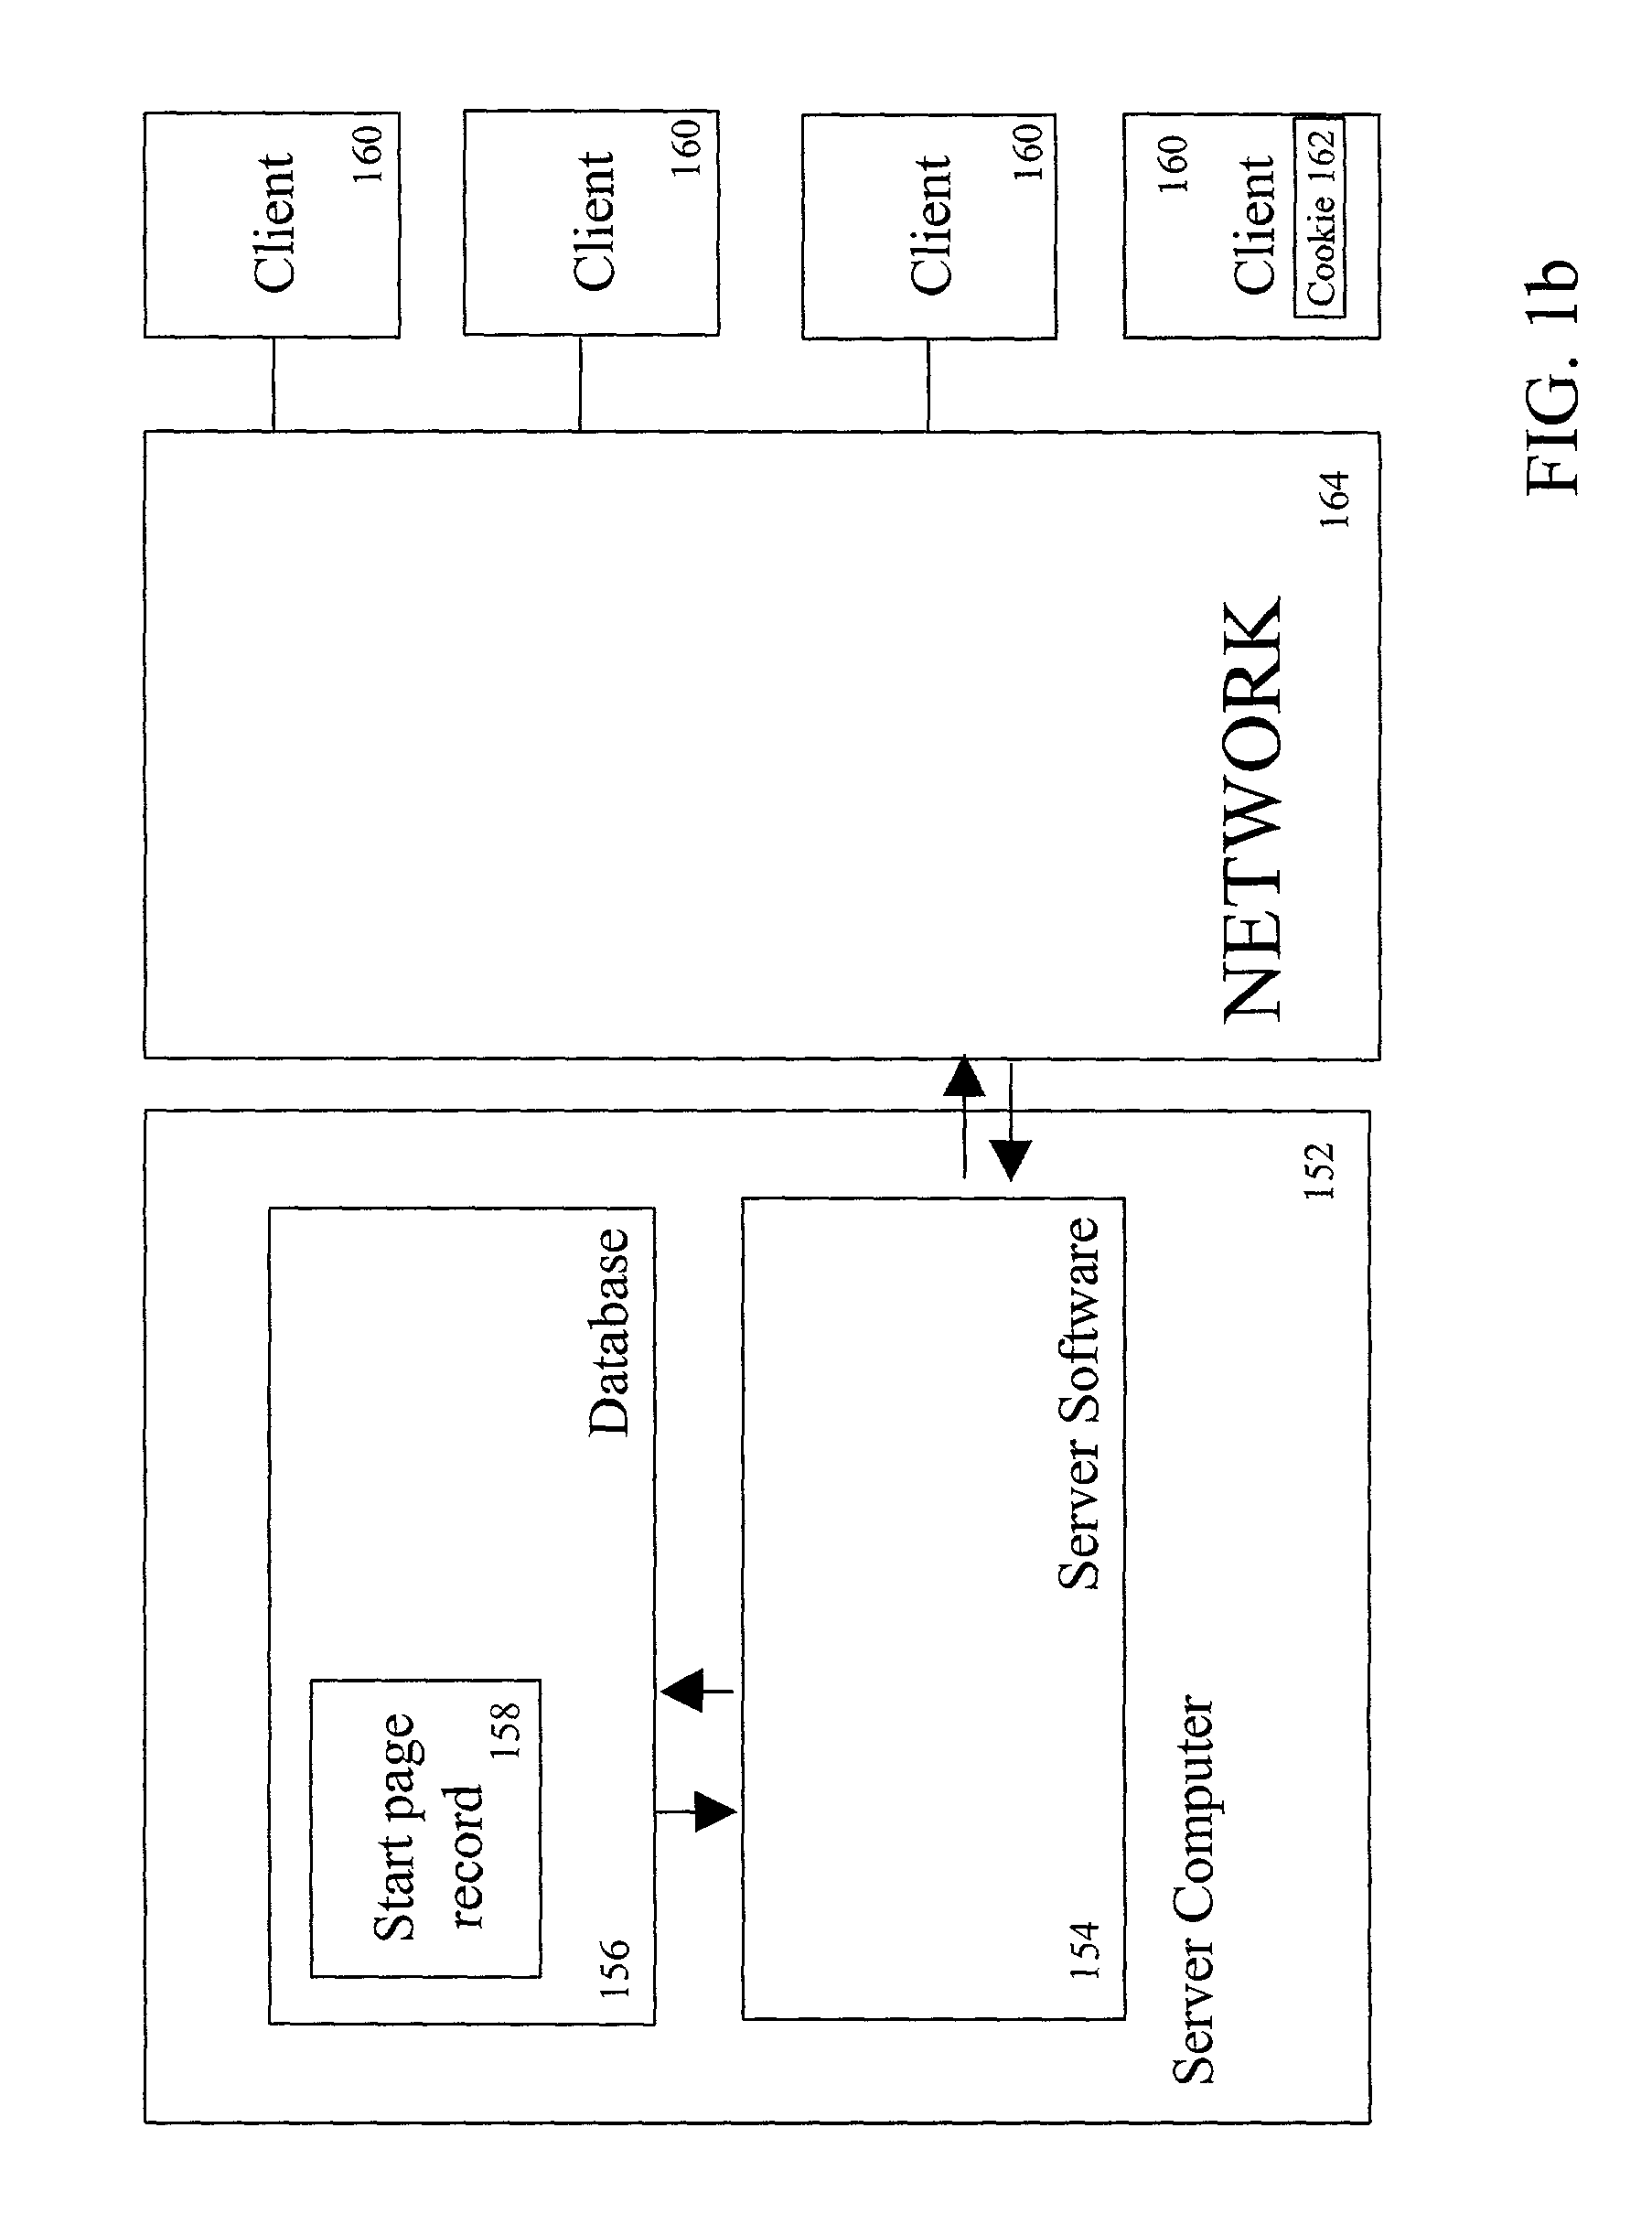 Method and apparatus for consolidating network information